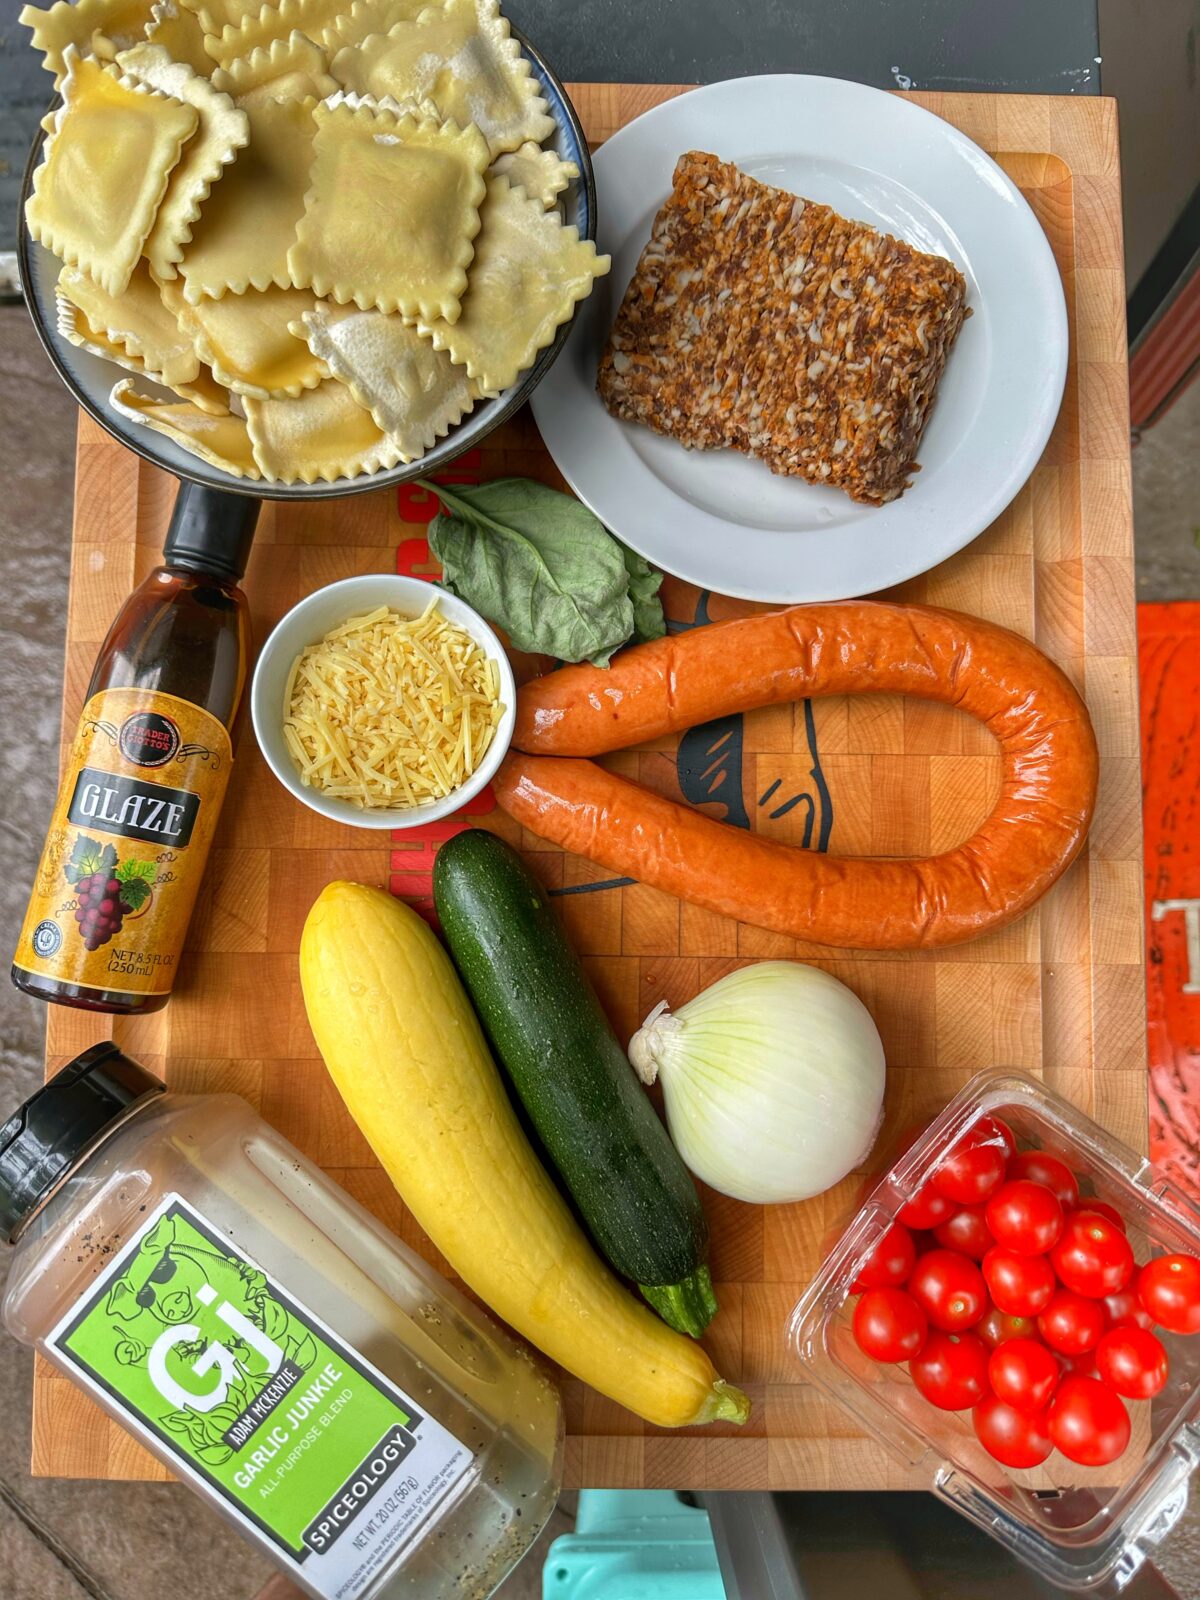 Ravioli, sausages, vegetables, and other ingredients on a cutting board.